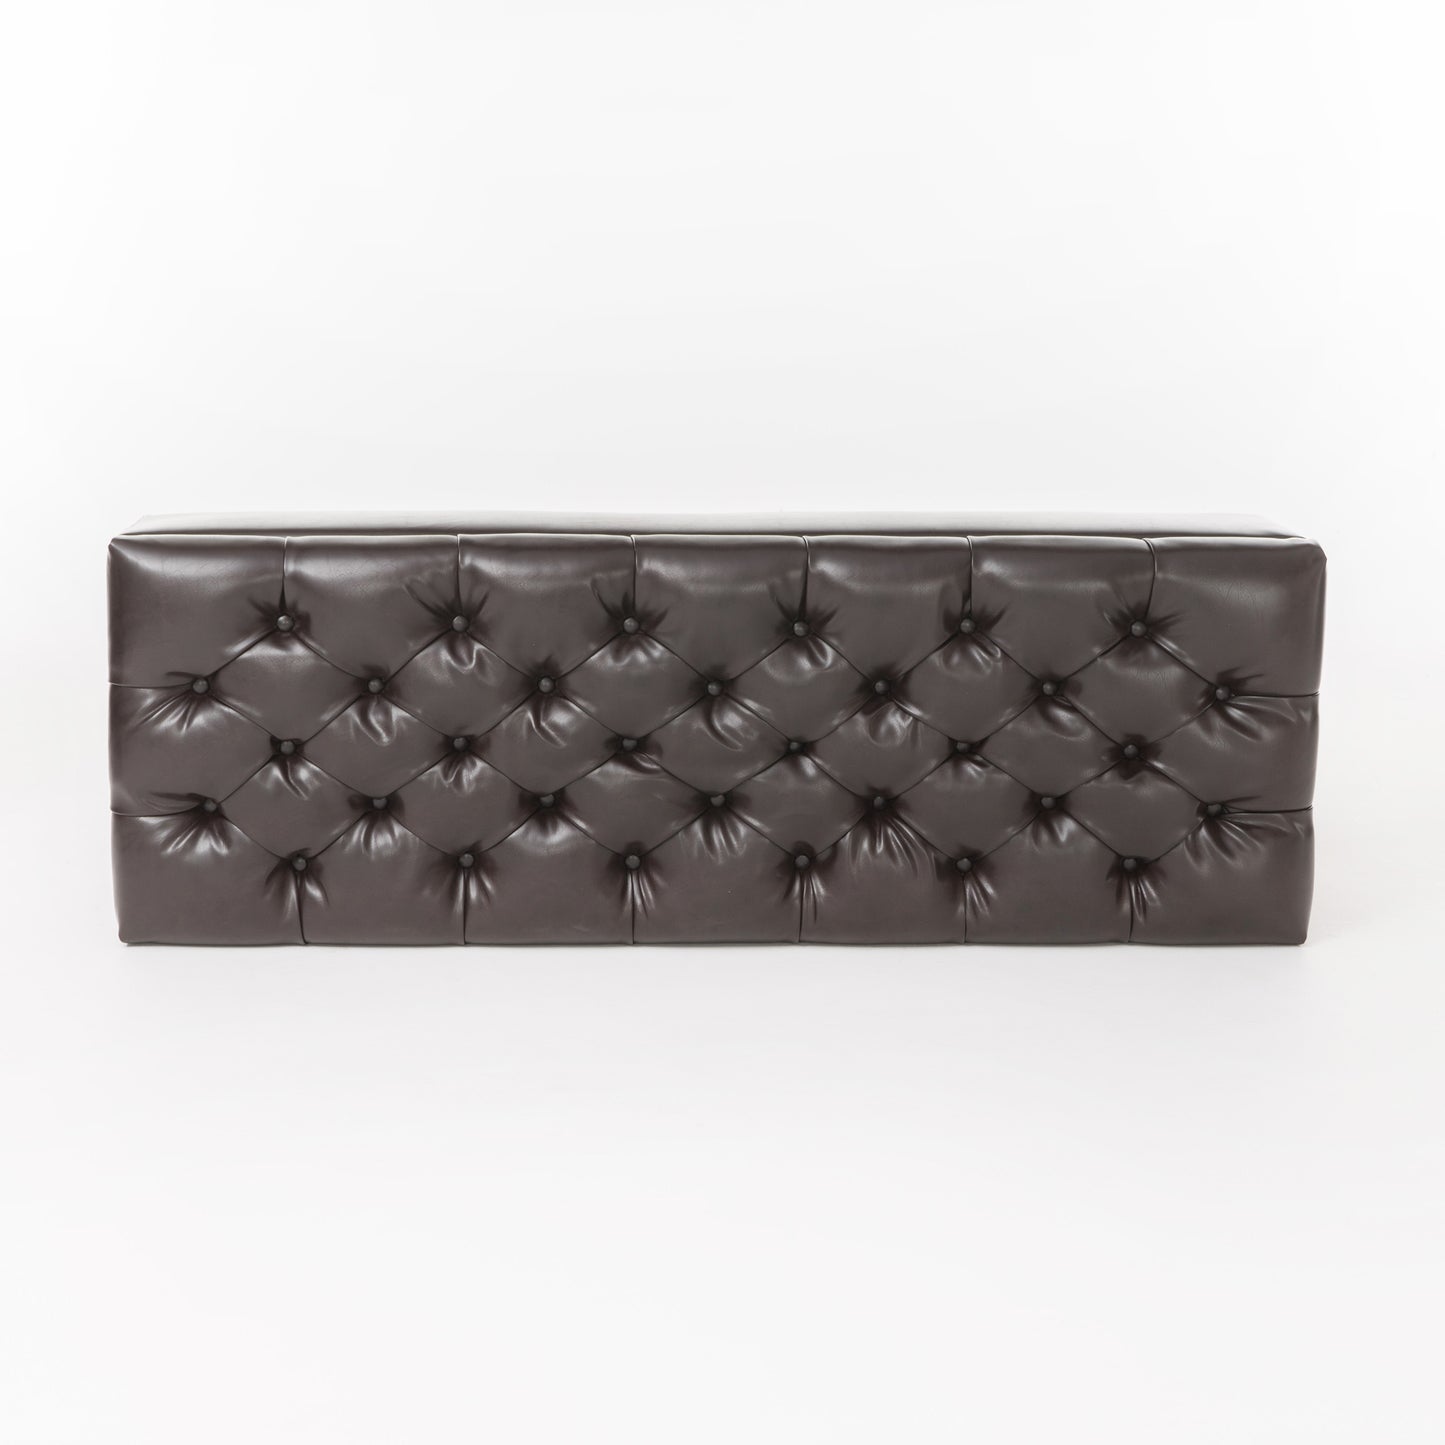 Molle Contemporary Button-Tufted Leather Storage Ottoman Bench